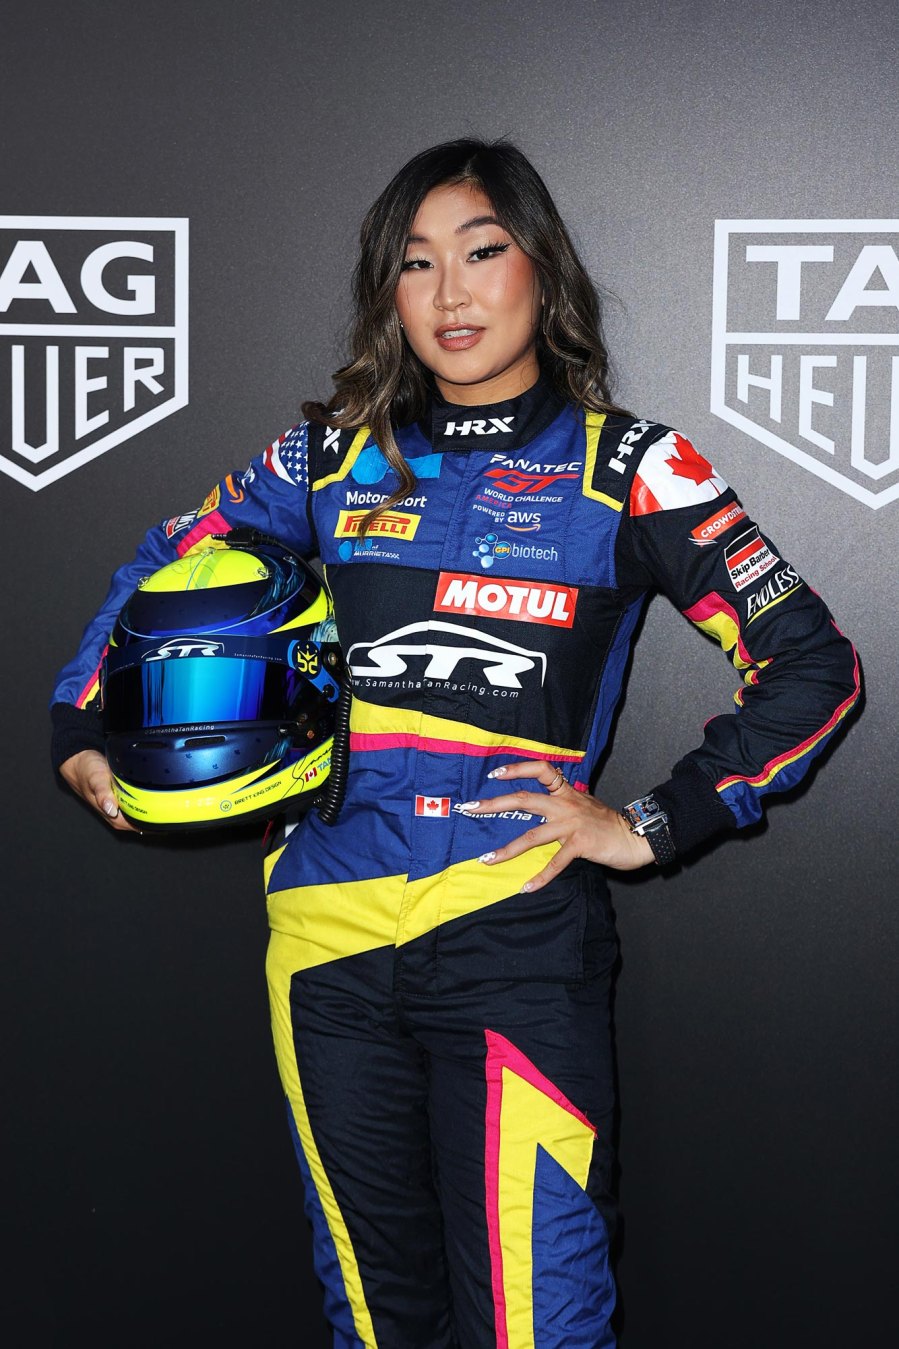 Racecar Driver Samantha Tan Makes Sure Her Skincare Is On Point Before Racing Competitions 287